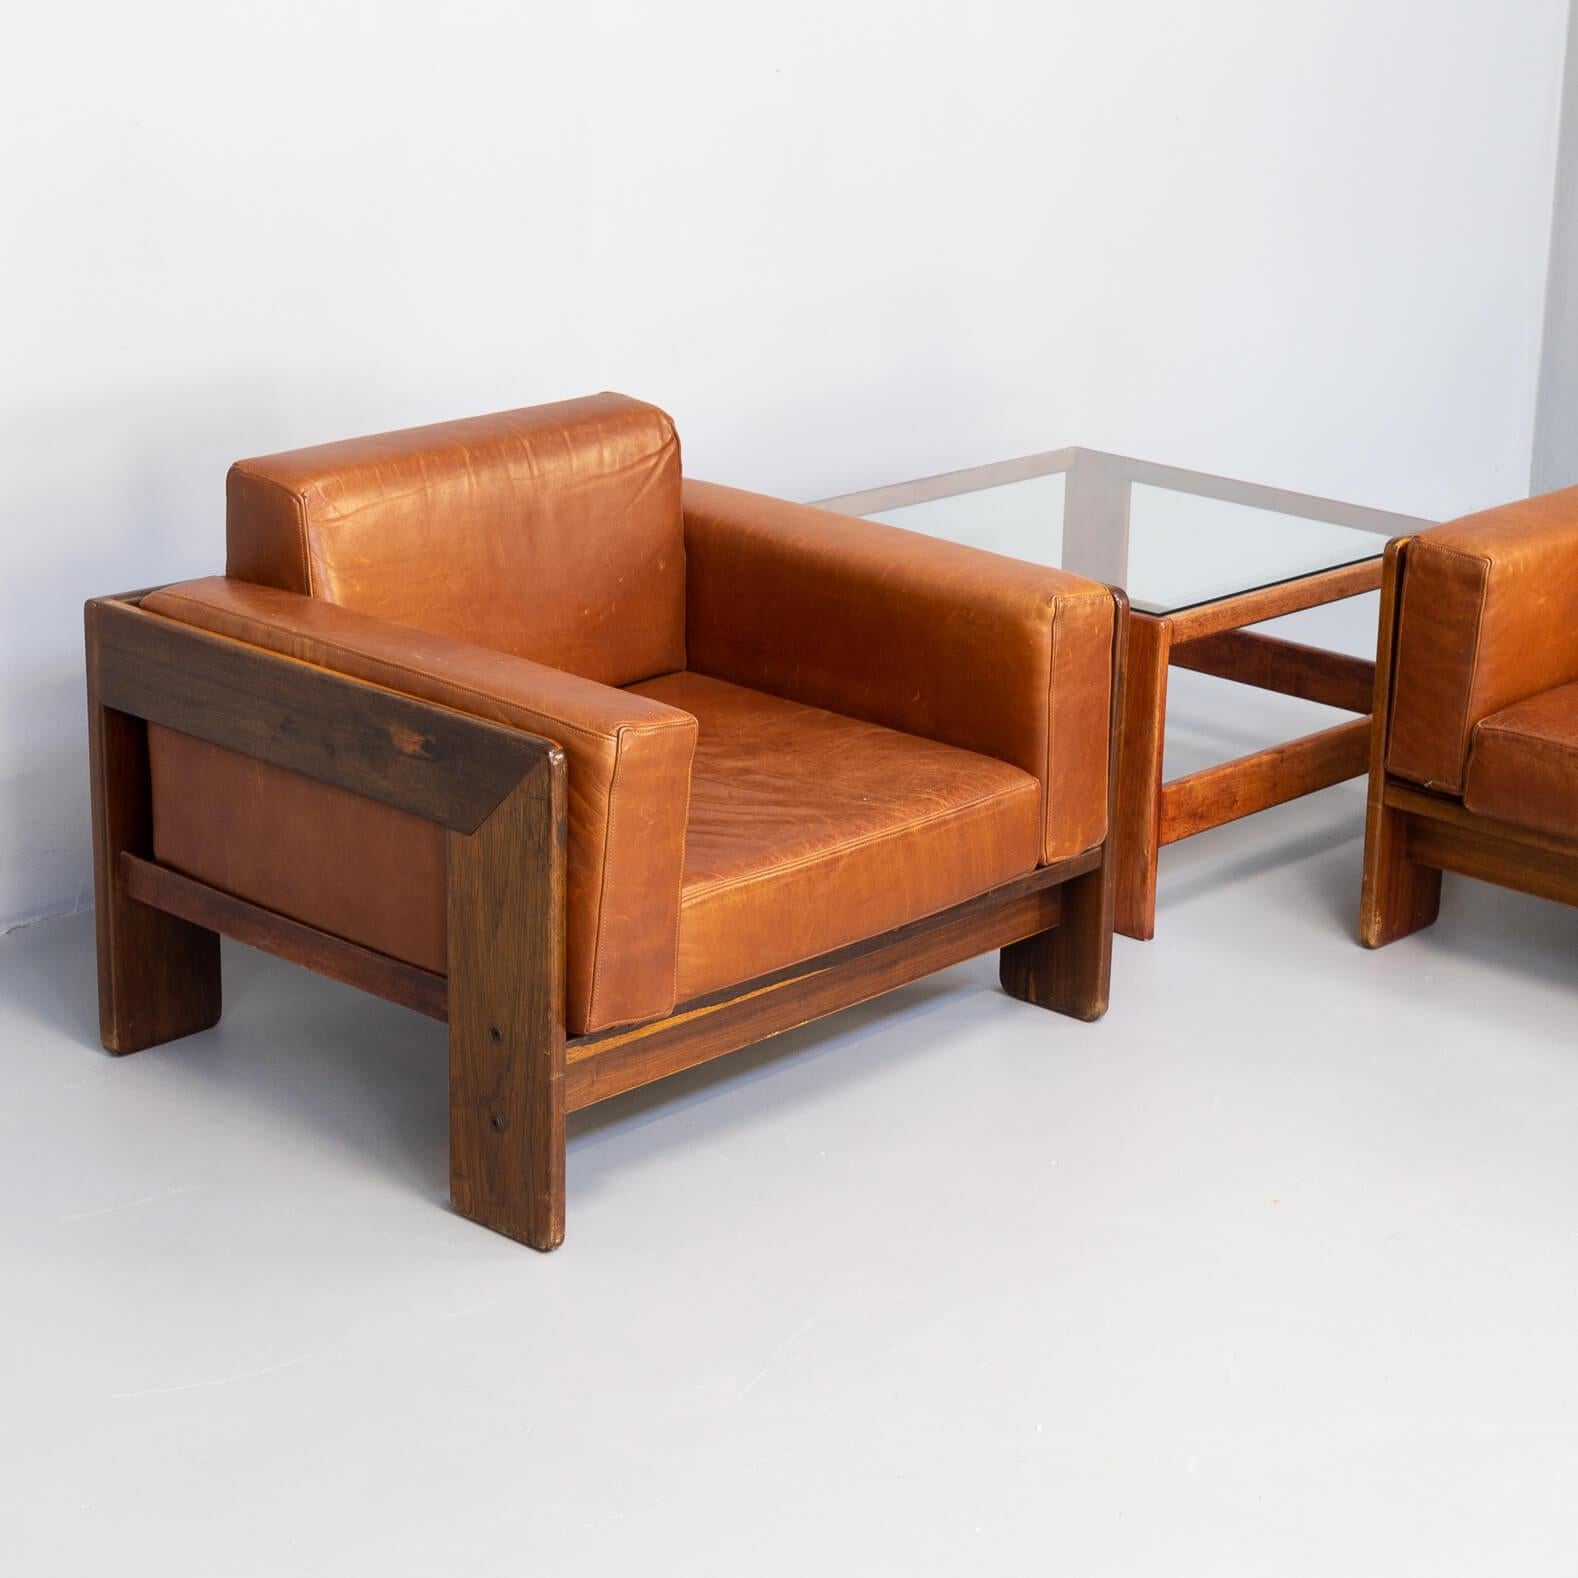 20th Century 60s Tobia Scarpa ‘Bastiano’ Sofa, Fauteuil & Sidetable Set for Knoll For Sale